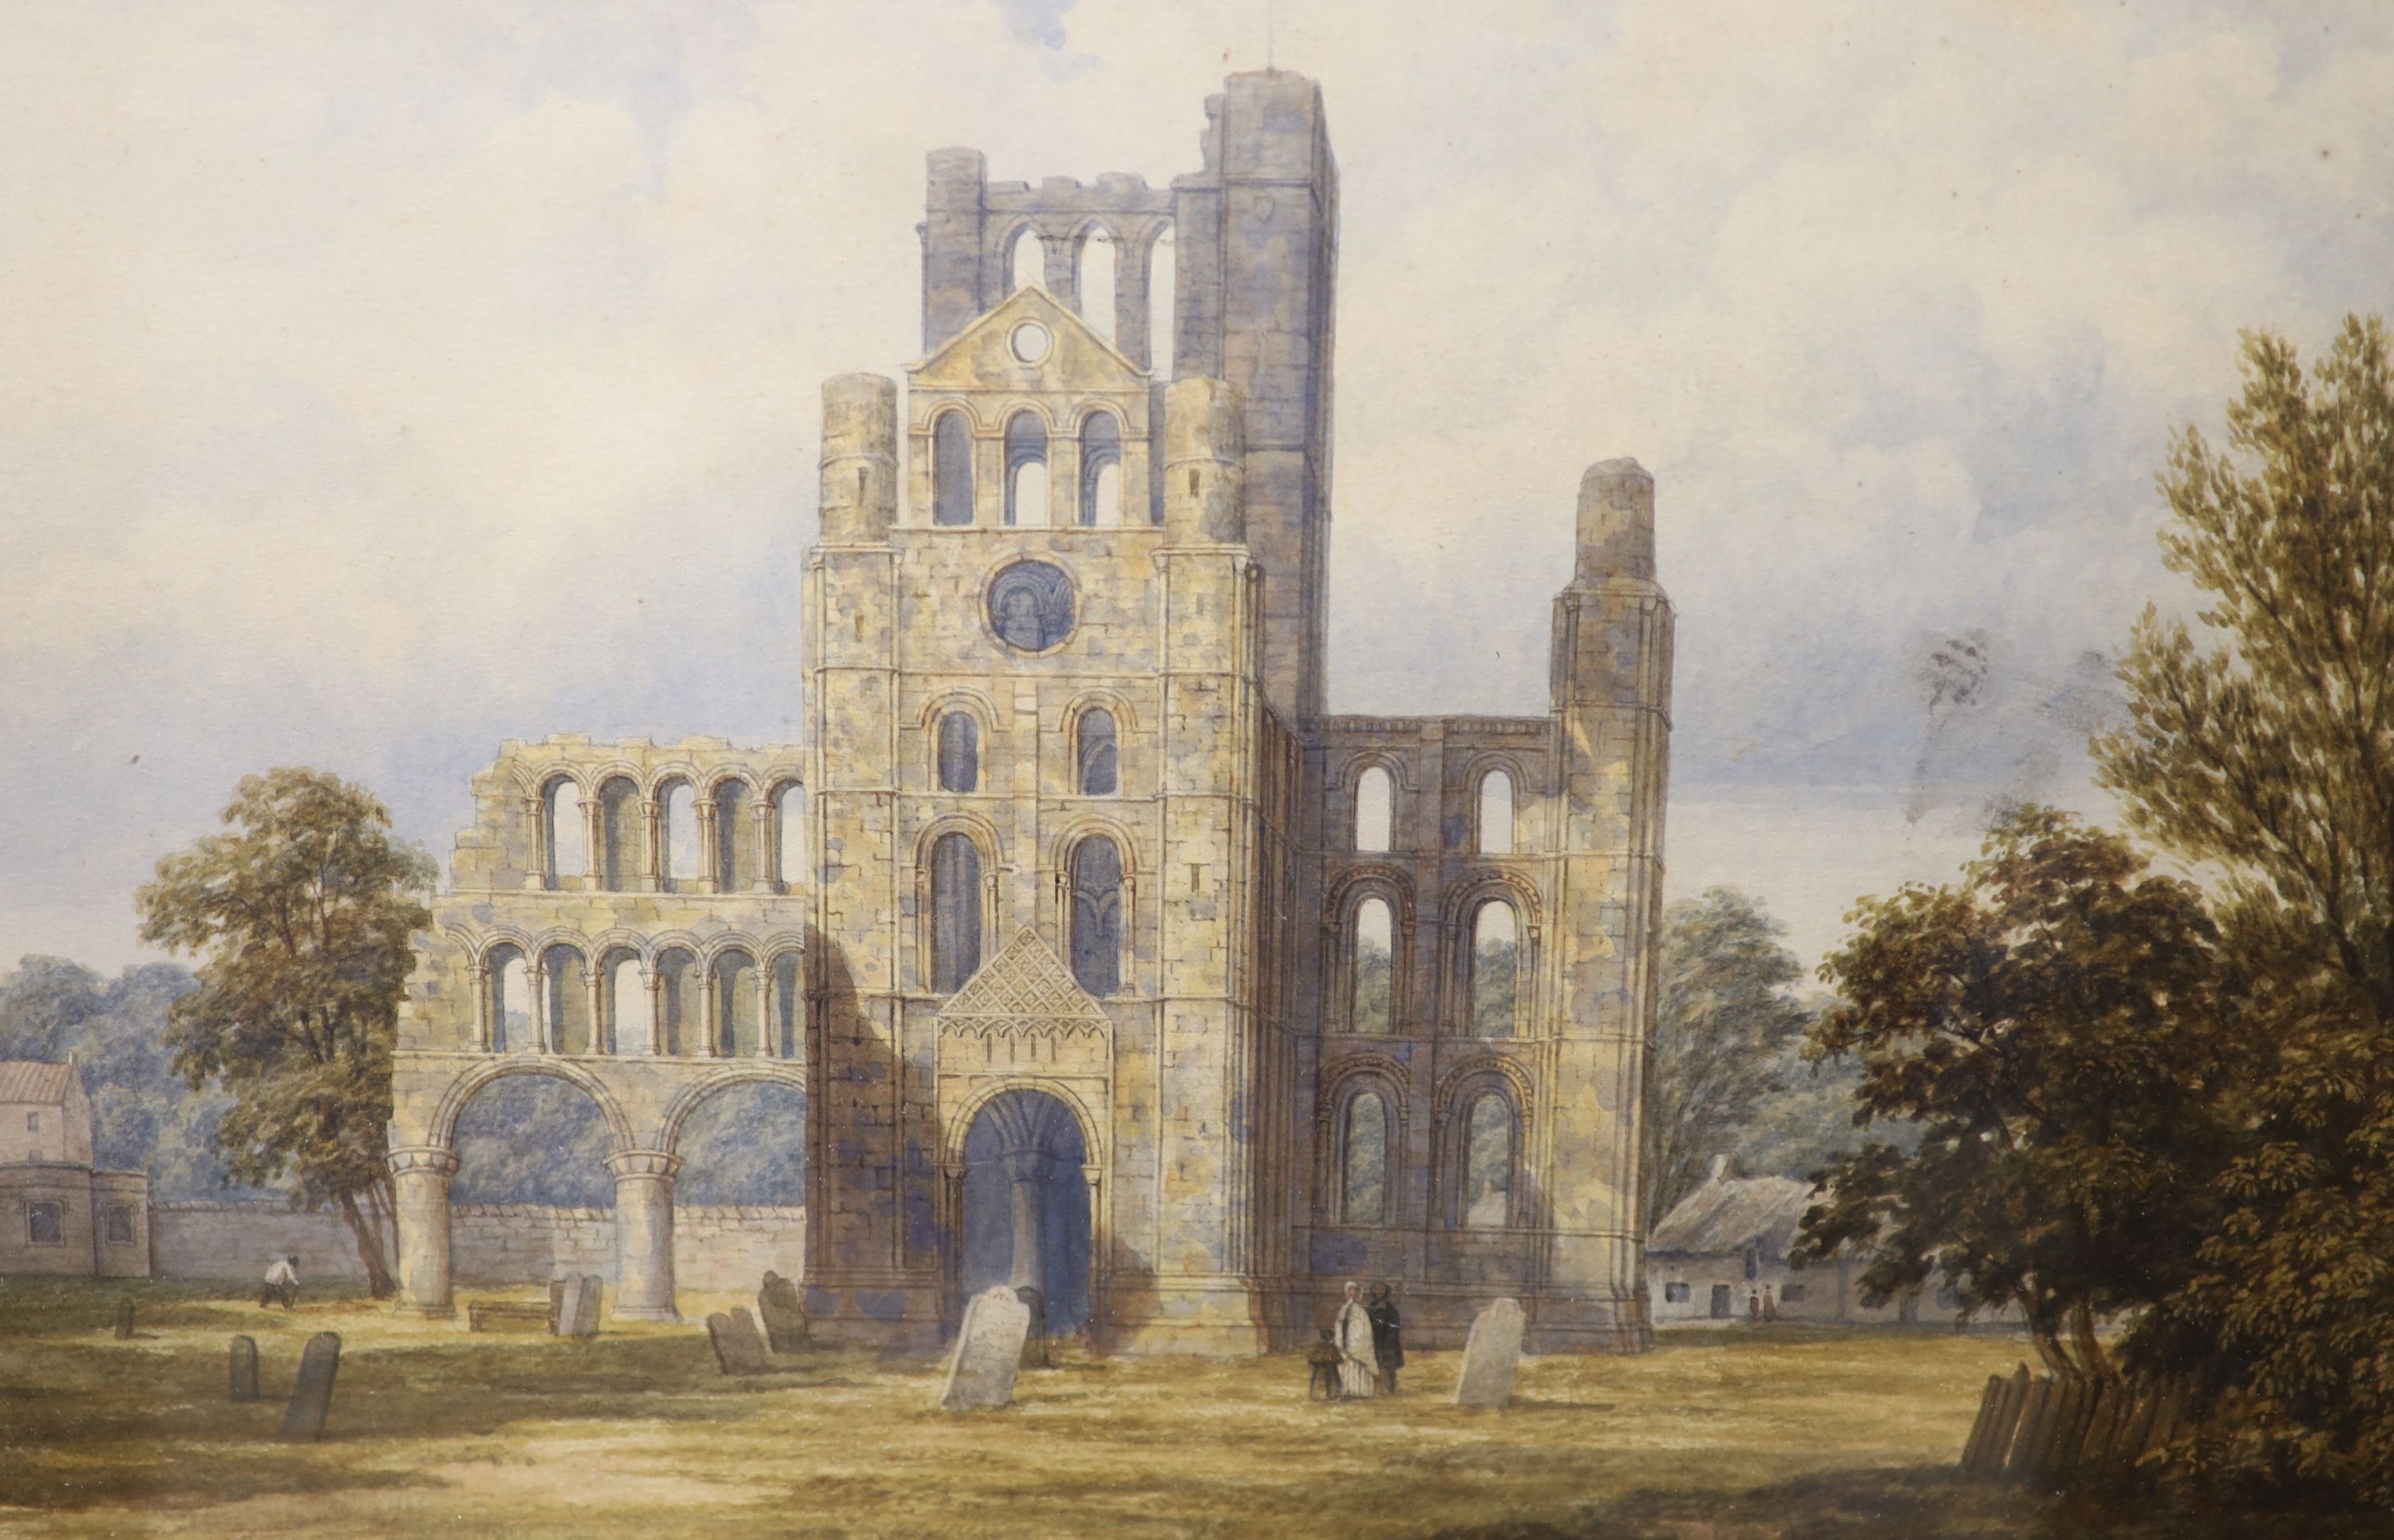 John Dobbin of Darlington (1815-1888), watercolour, Ruins of Kelso Abbey, inscribed verso, 23 x 35cm, an engraving of ruins and another entitled 'The Blessing'